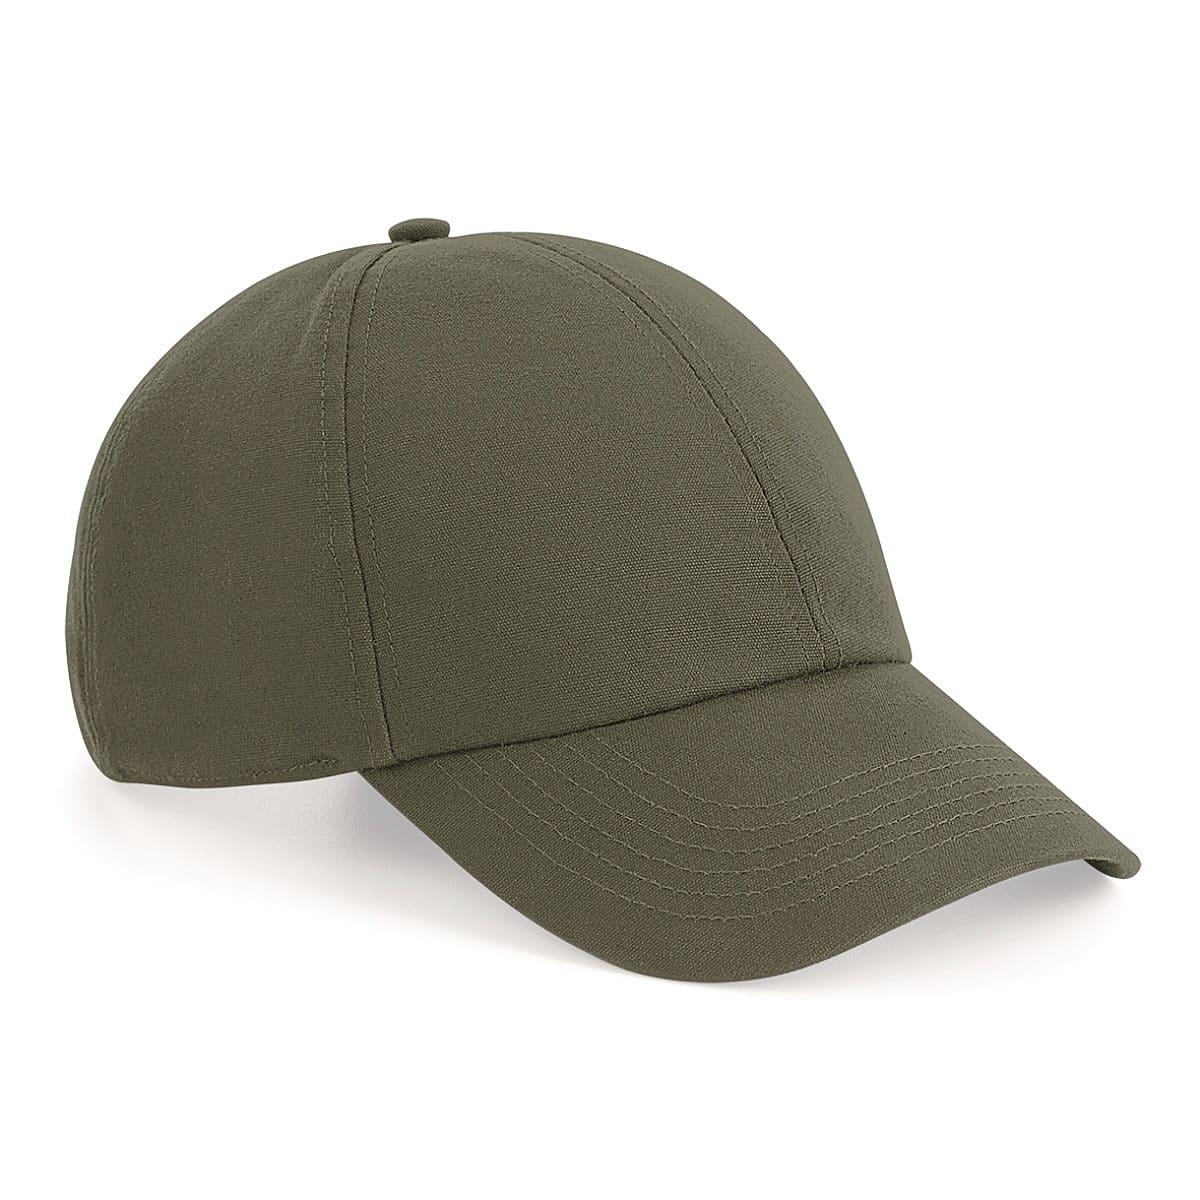 Beechfield Organic Cotton 6 Panel Cap in Olive Green (Product Code: B54)